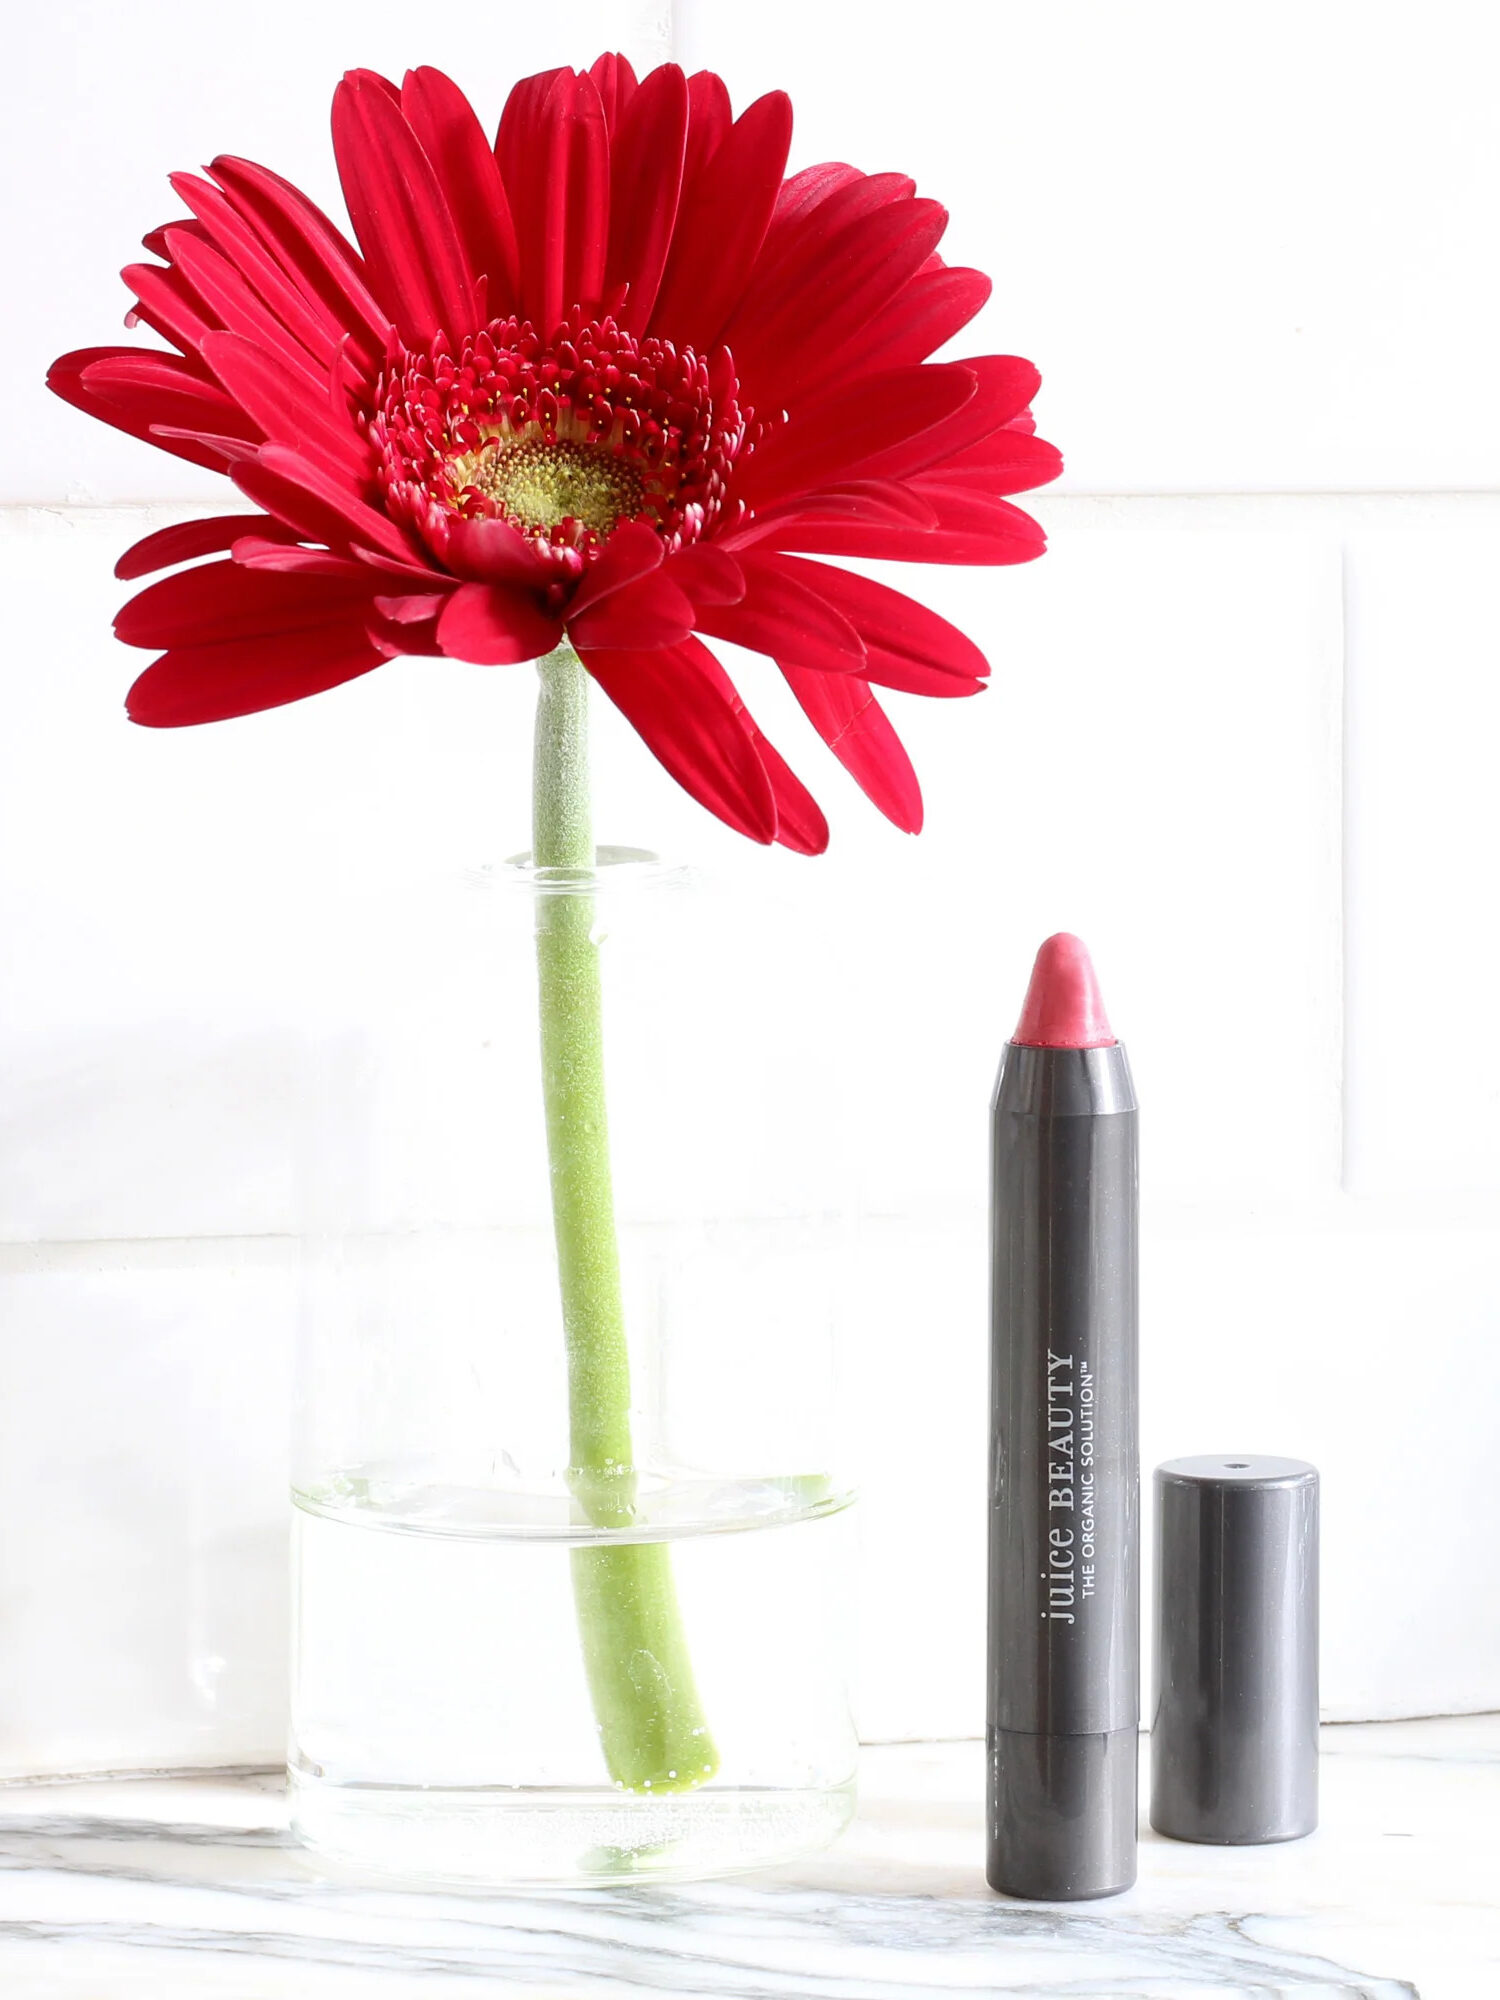 A Juice Beauty jumbo Lip Pencil with a red flower in a clear vase to the left of the pencil.